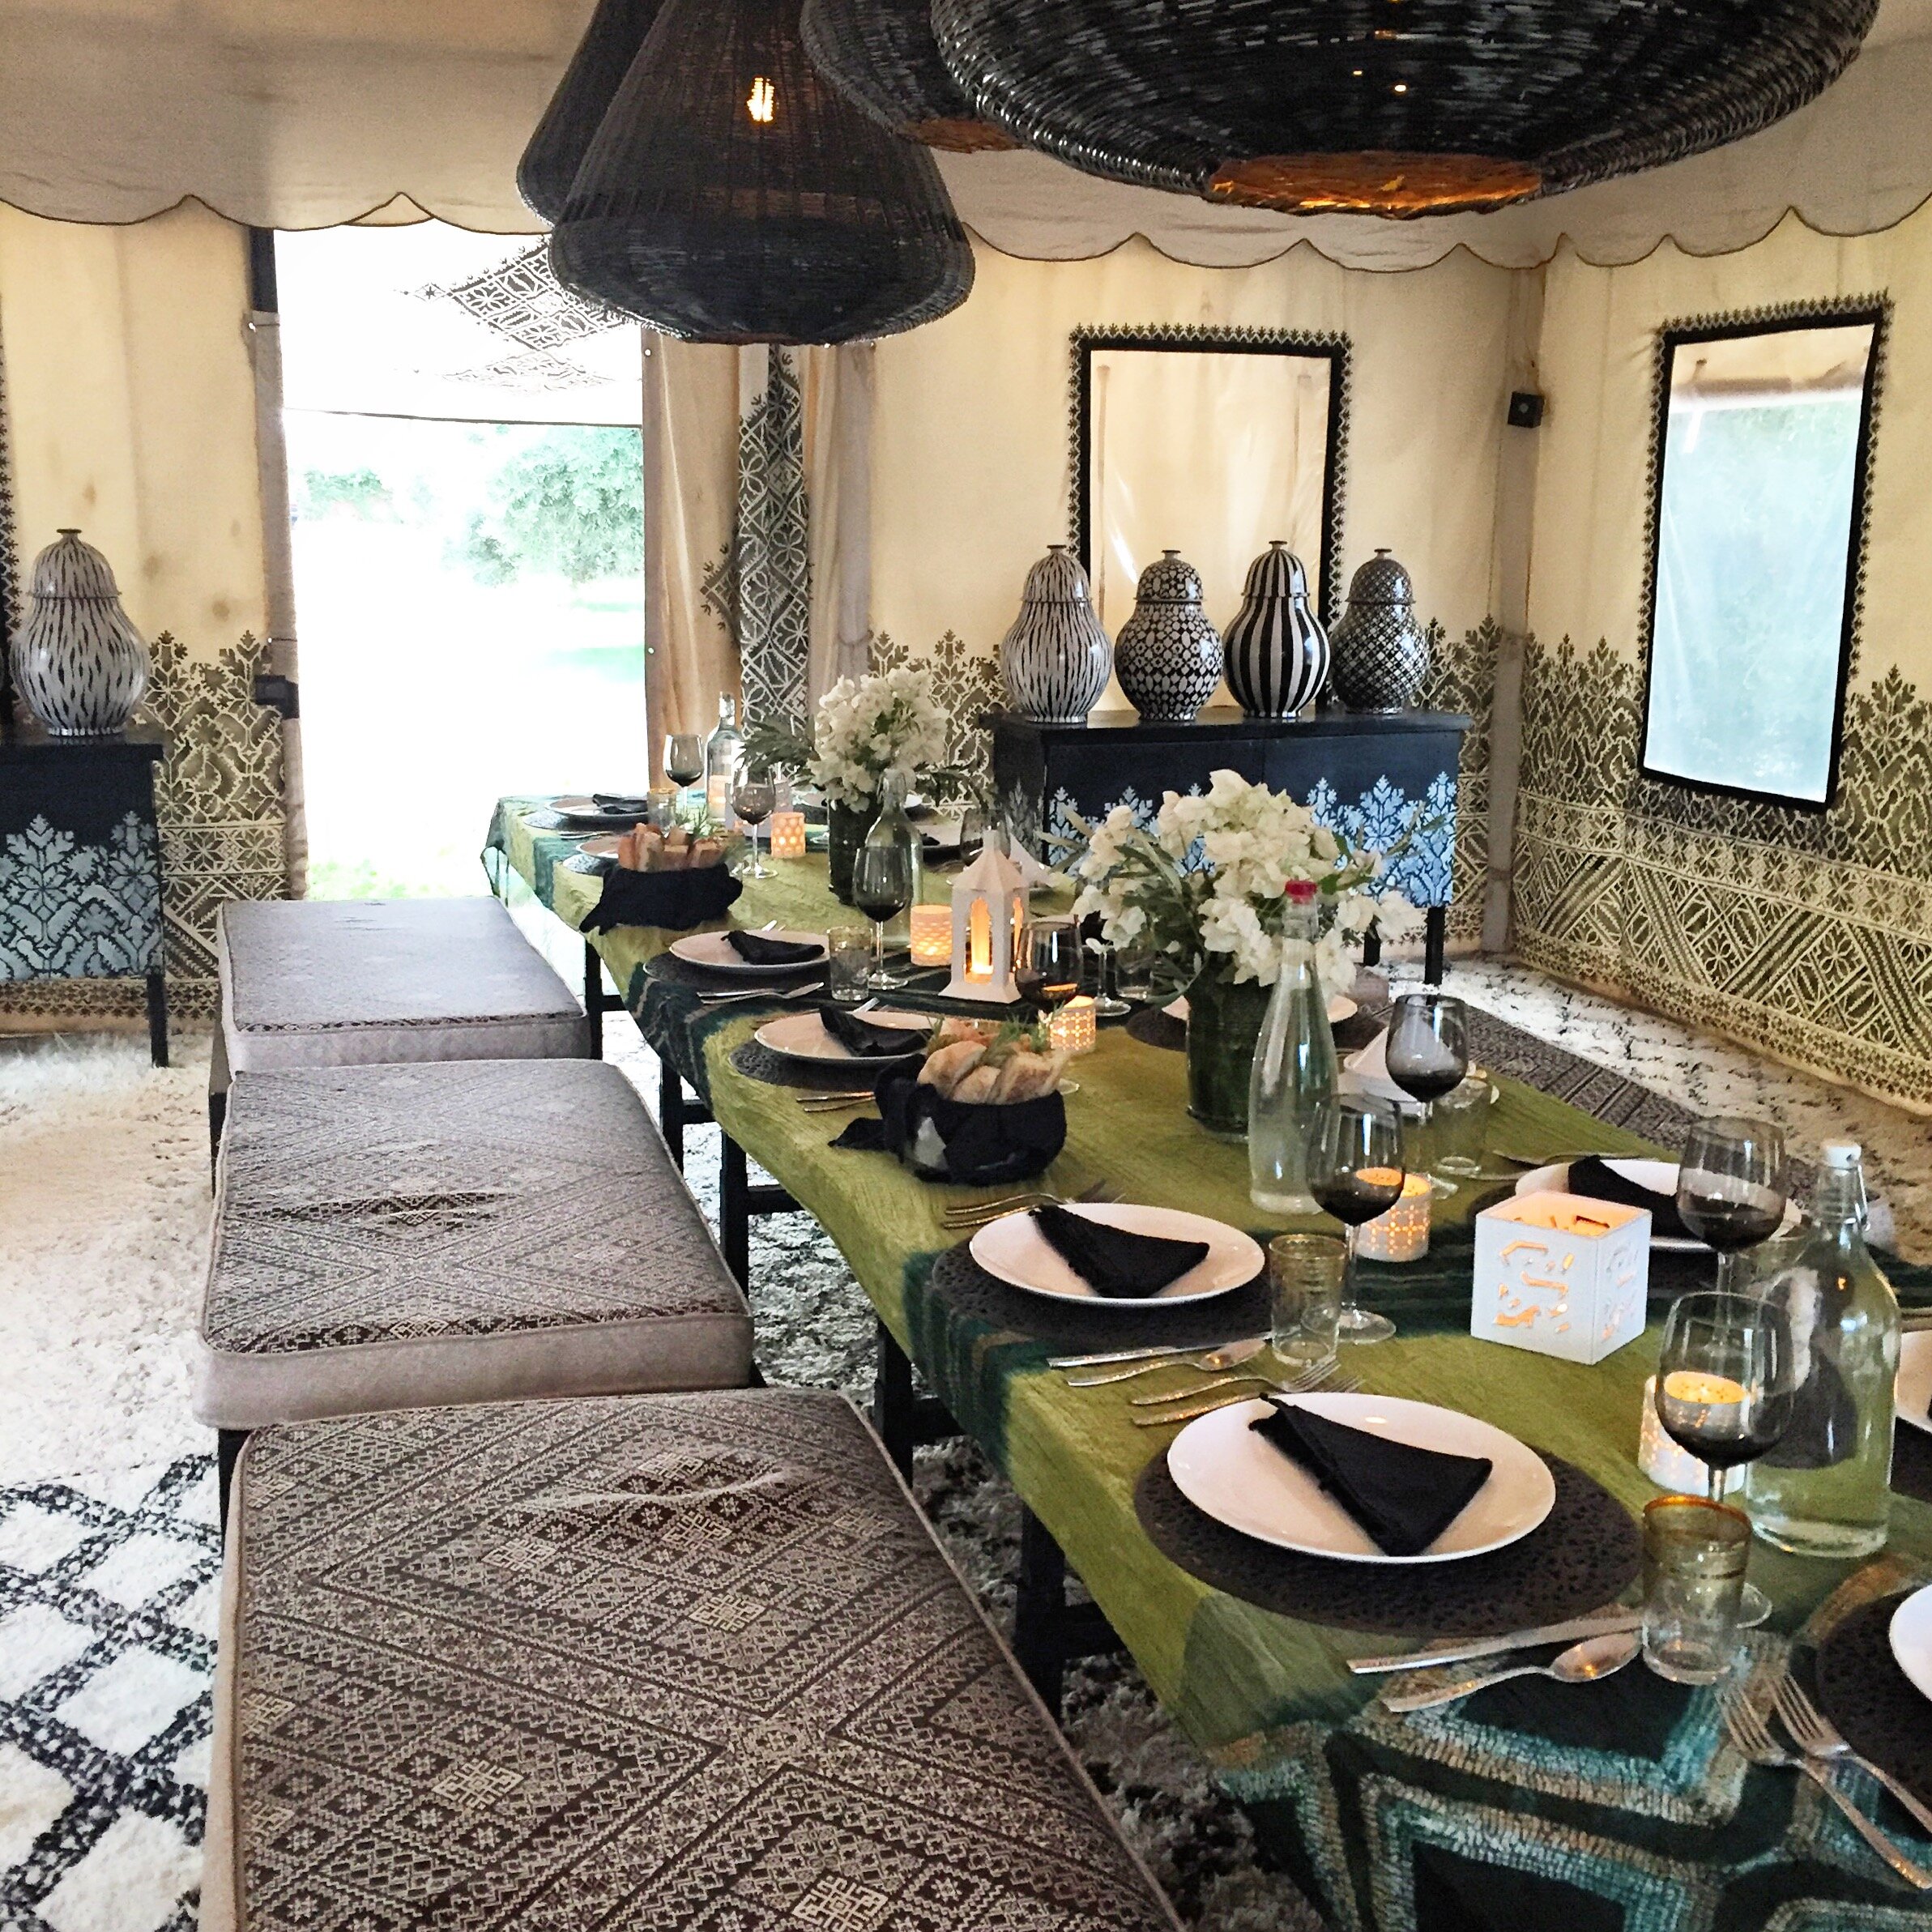 Tent dining with green setting | EAT.PRAY.MOVE Yoga | Marrakesh, Morocco